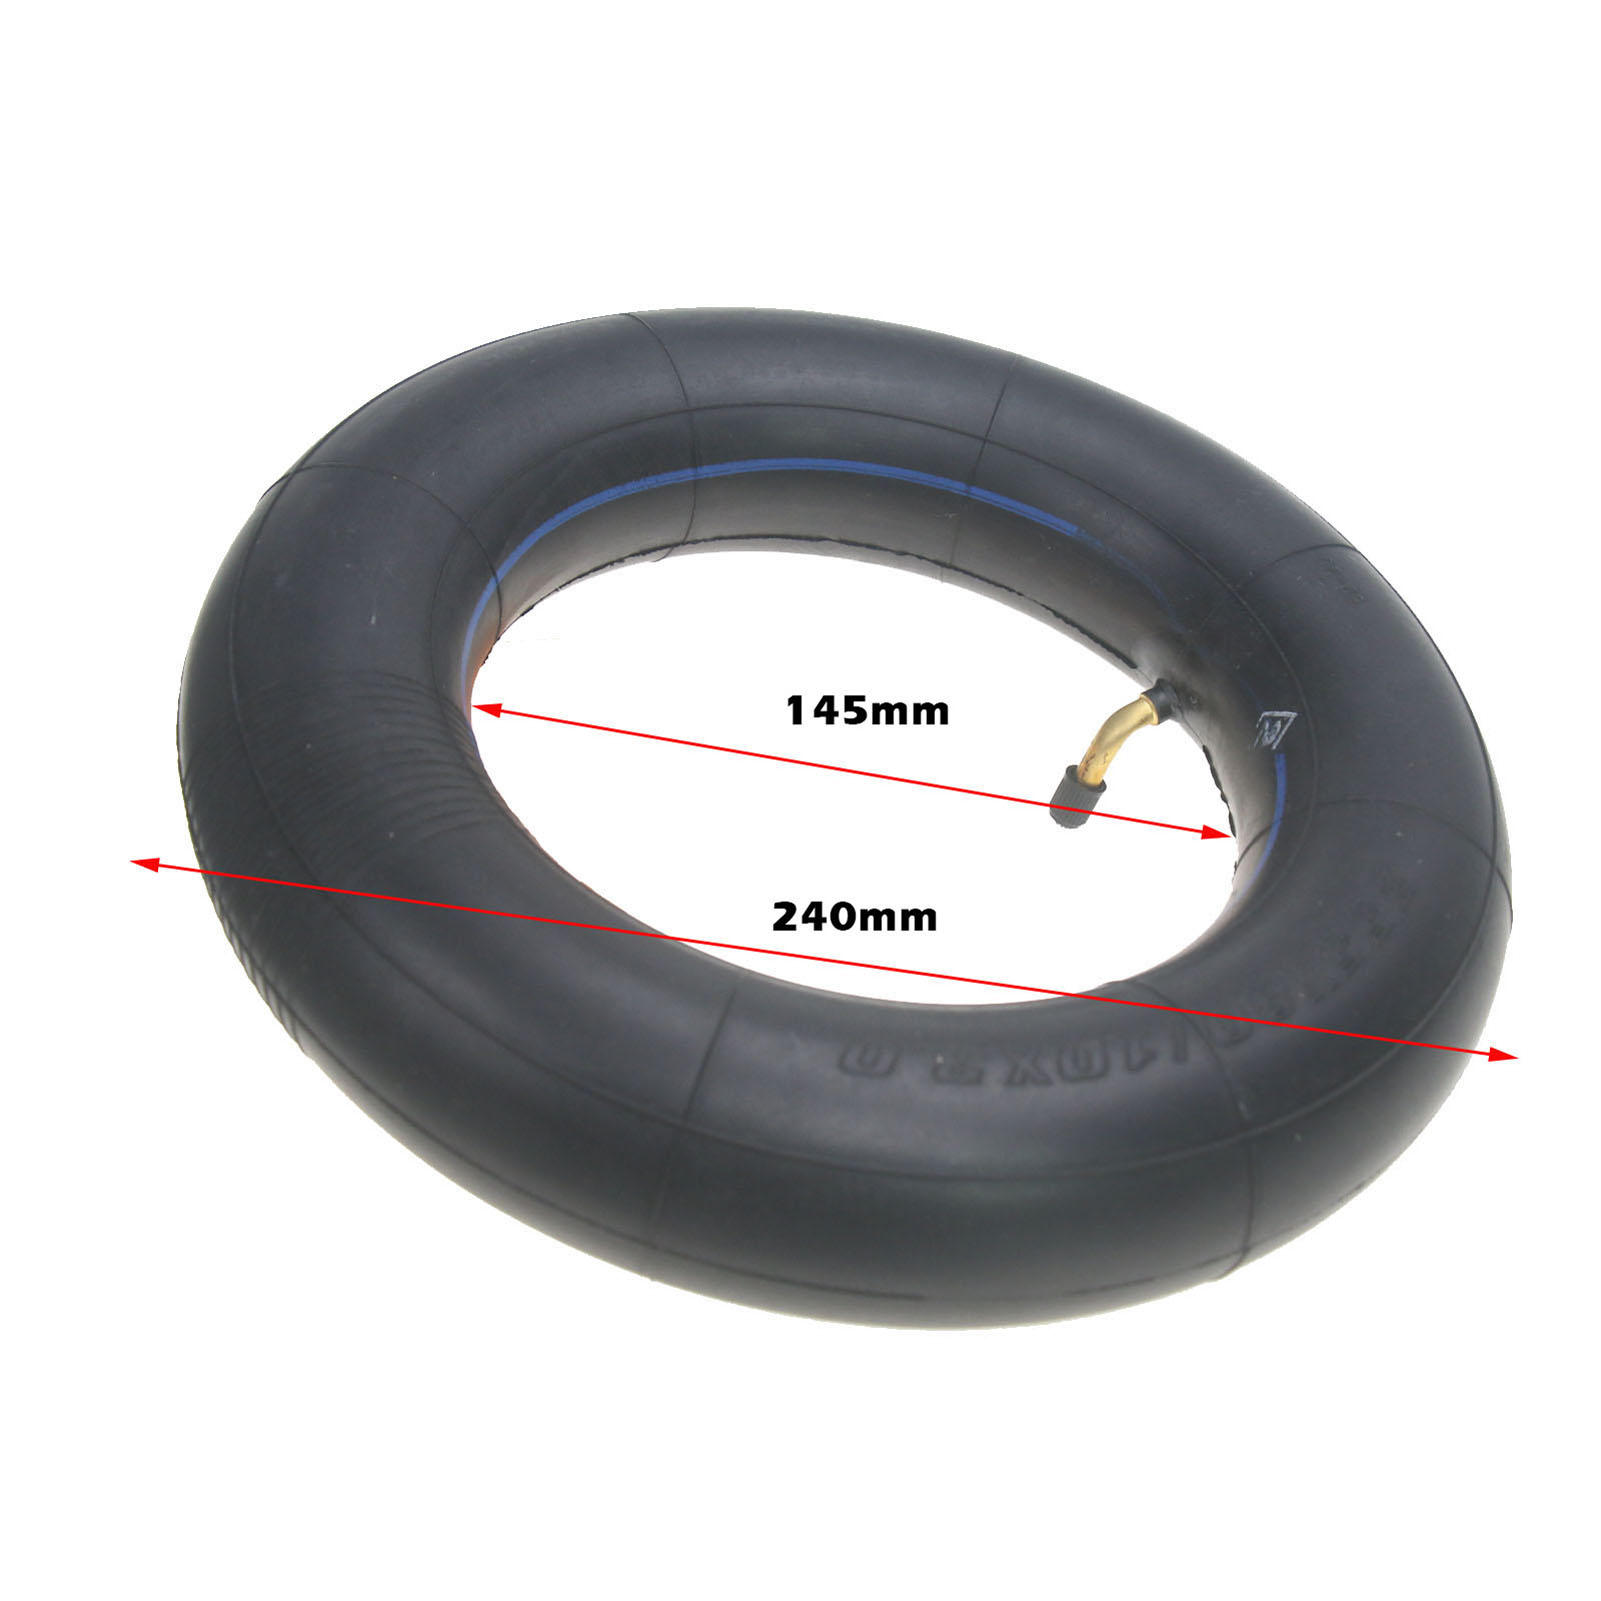 Thickened 10 * 3 Inner Tube Electric Scooter Tire 255 * 80 Inner Tube Suitable for 90/65-6.5 and 80/65-6.5 Tires 240mm Diameter Tire Electric Skateboard Inner Tube - image 4 of 5